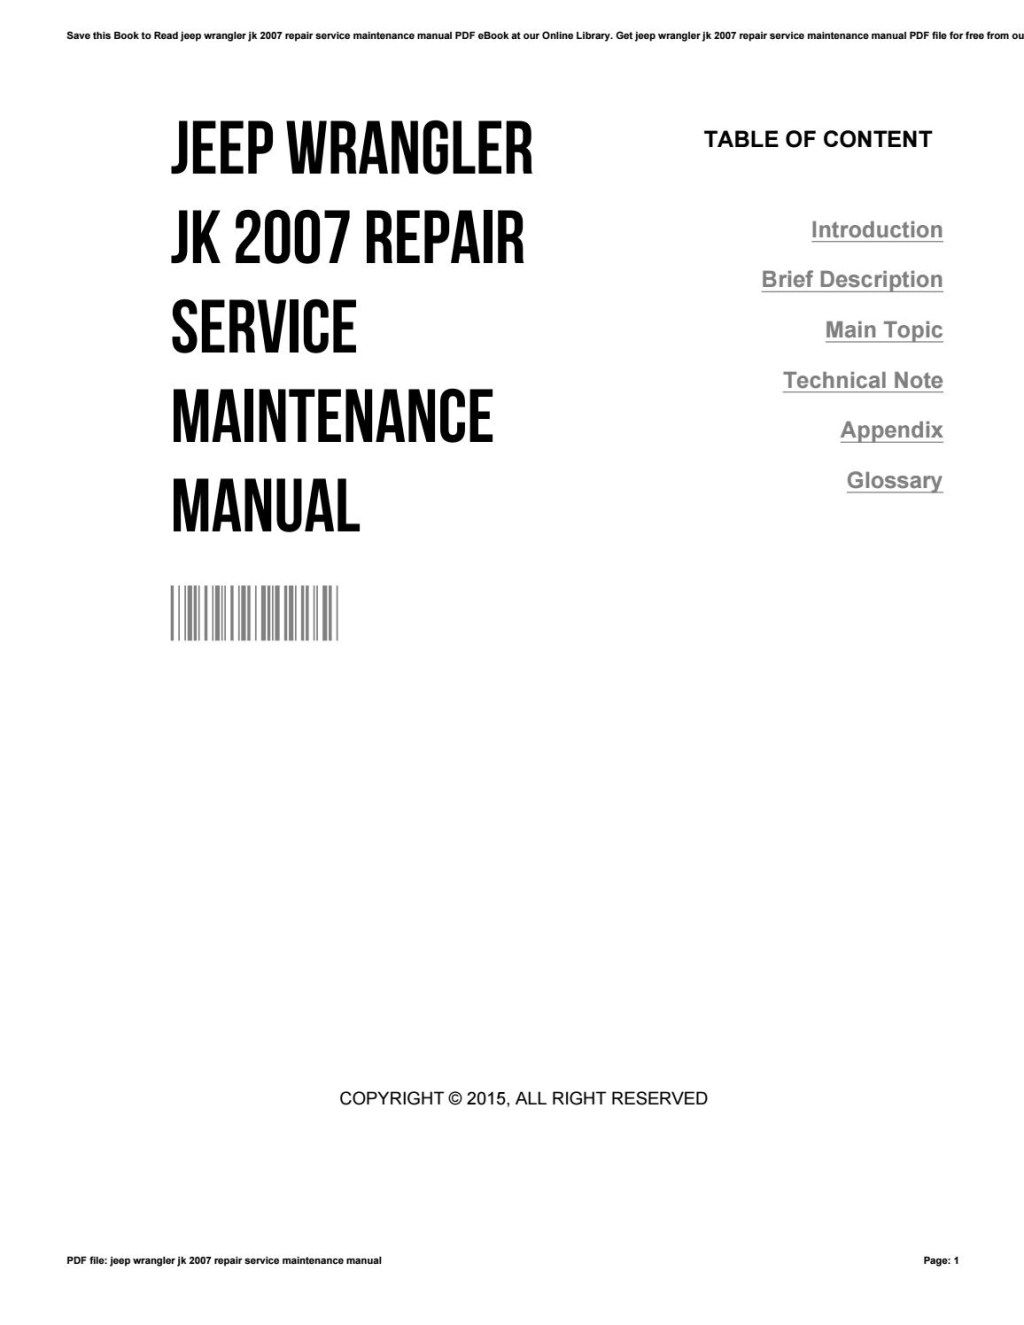 Picture of: Jeep wrangler jk  repair service maintenance manual by p